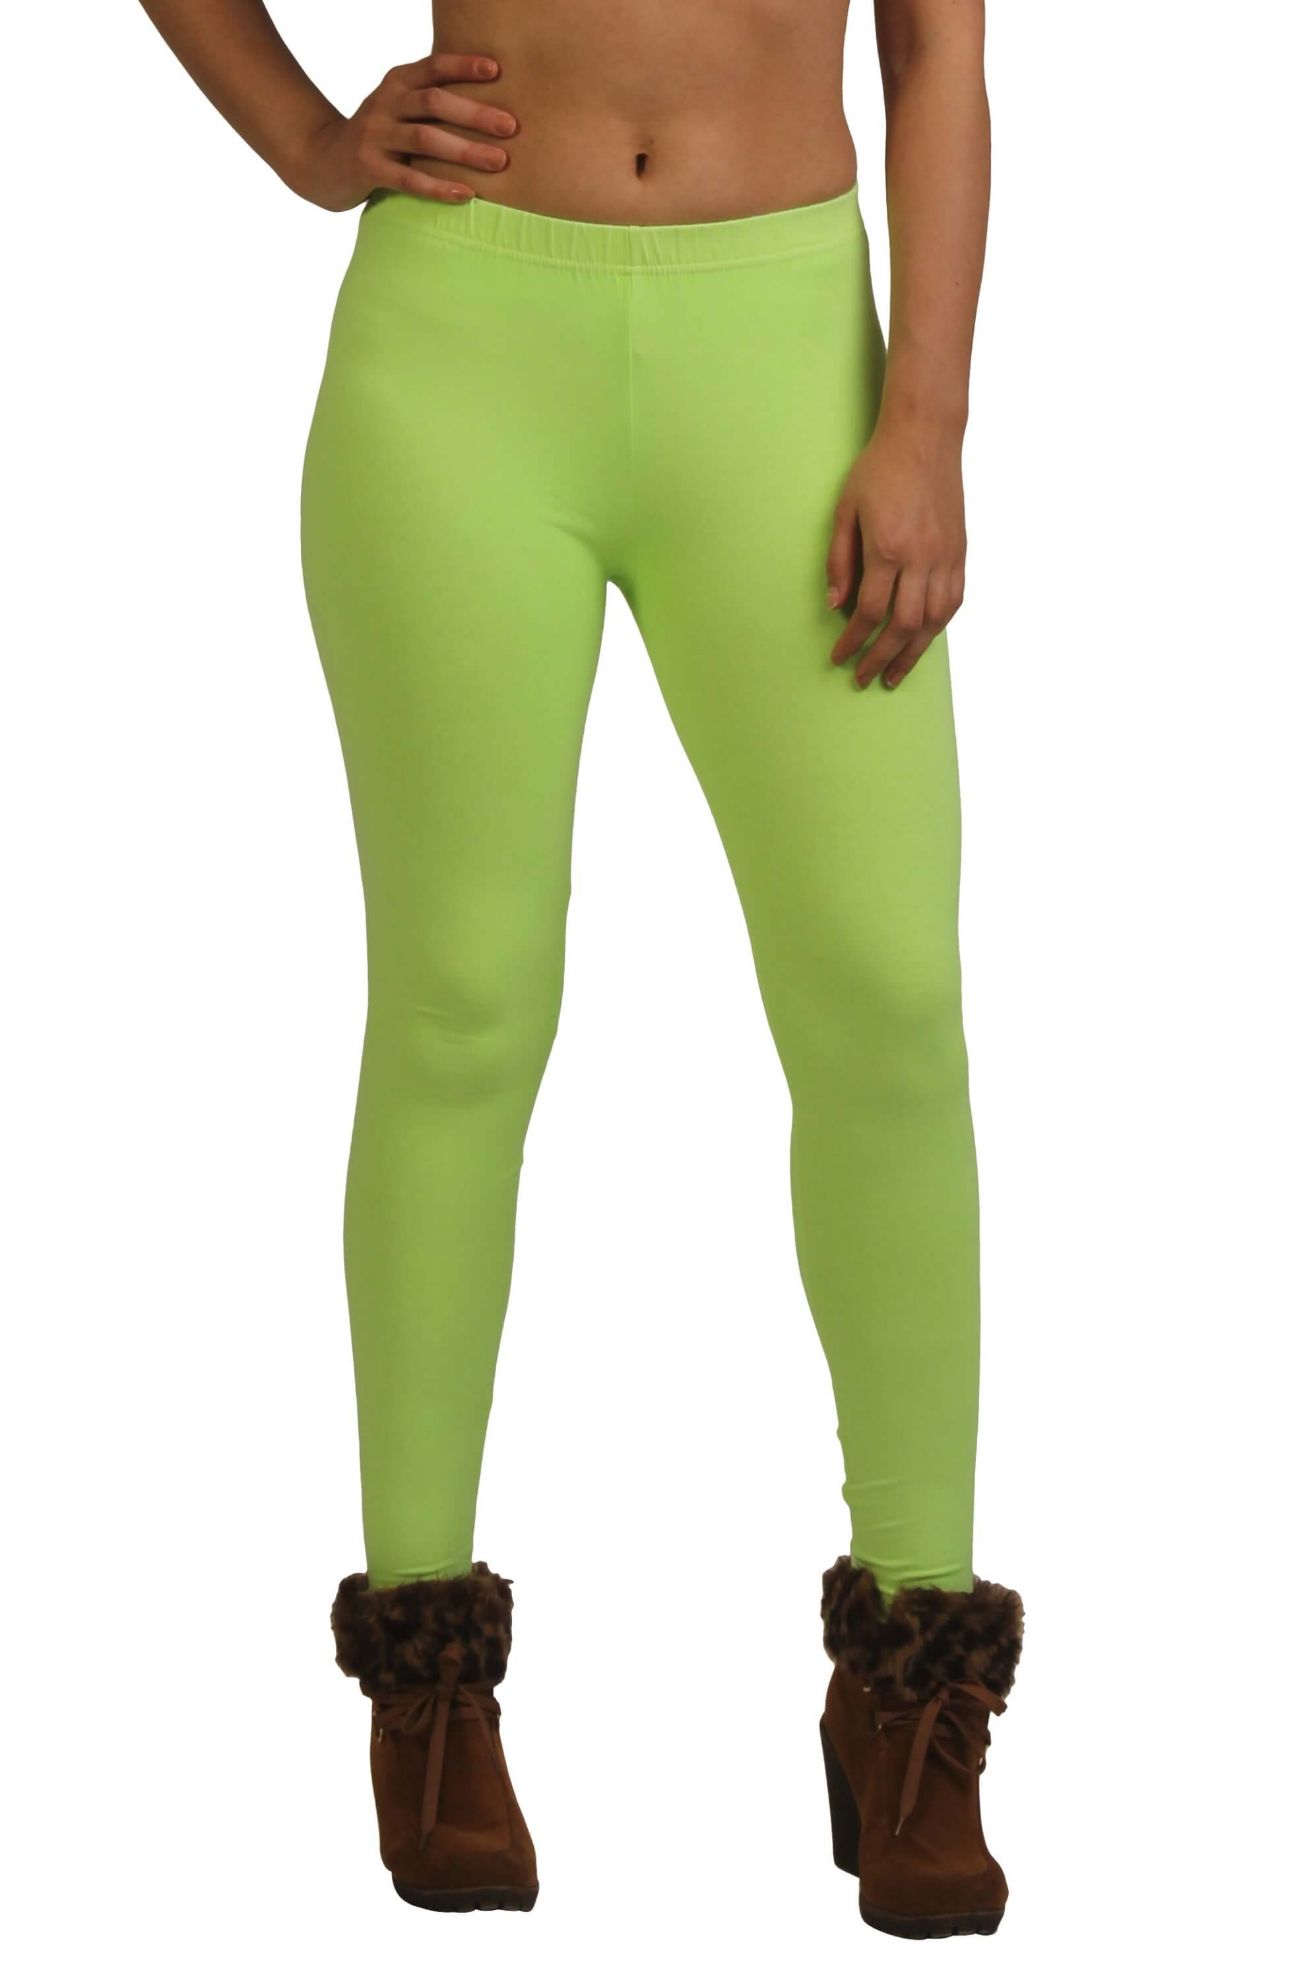 Frenchtrendz  Buy Frenchtrendz Cotton Spandex Neon Green Ankle